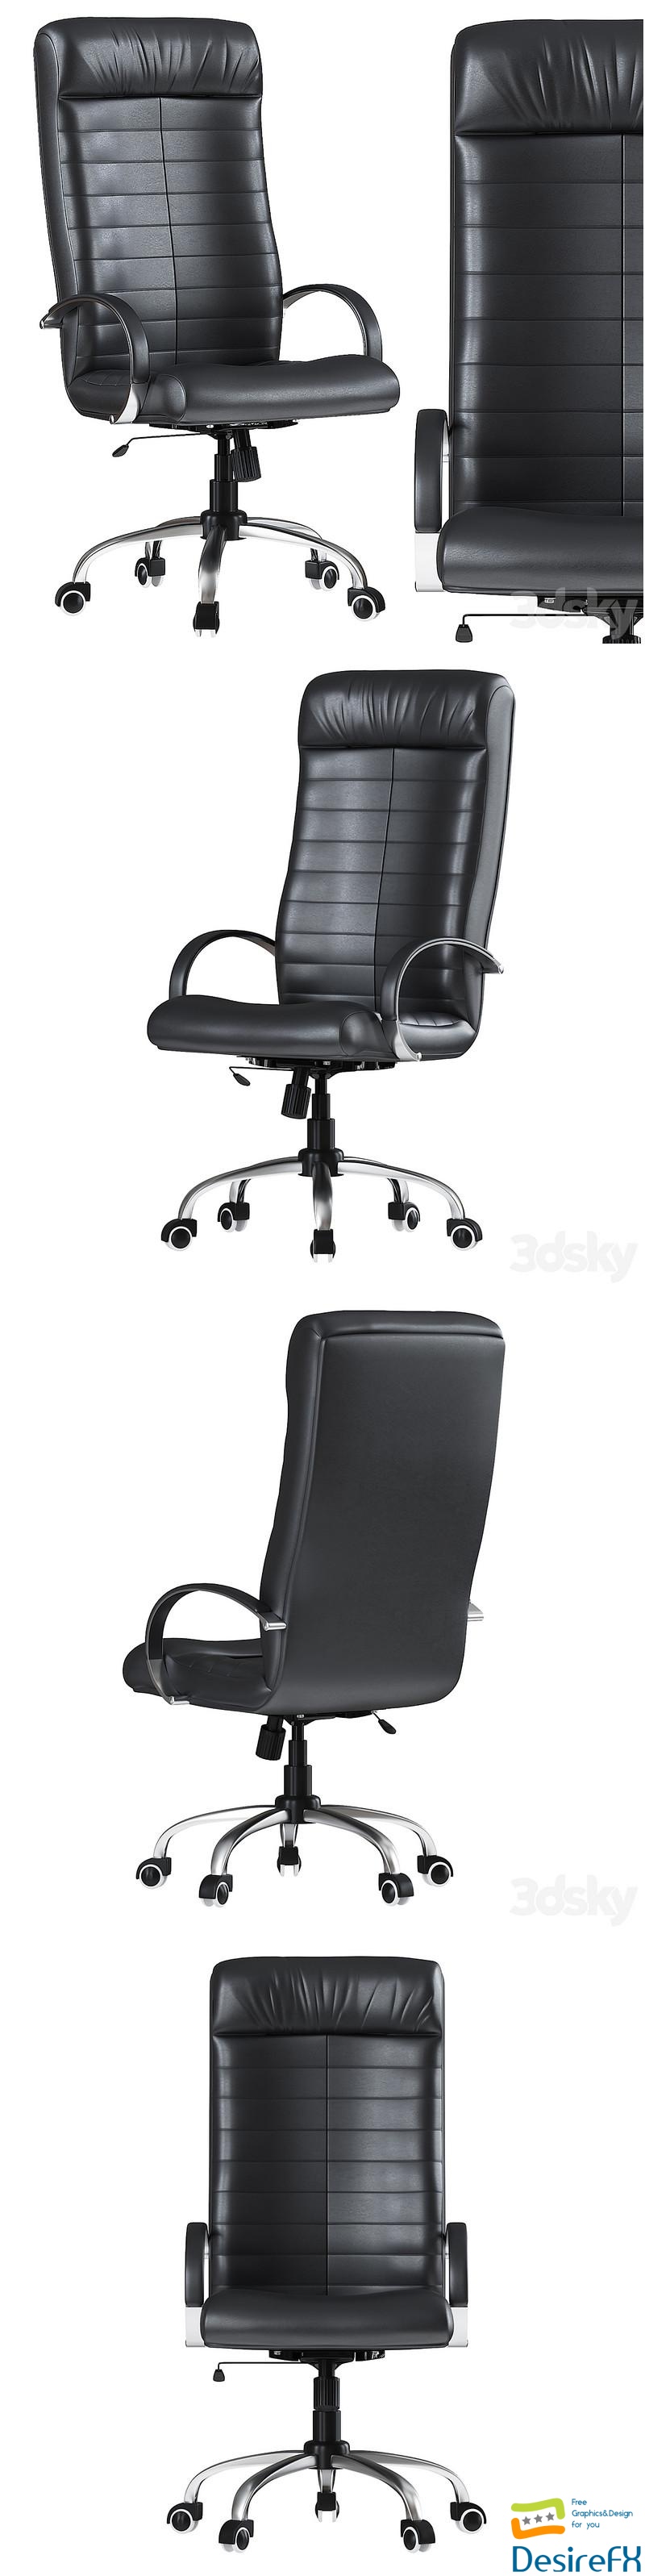 Office Chair2 Consul Conference 3D Model